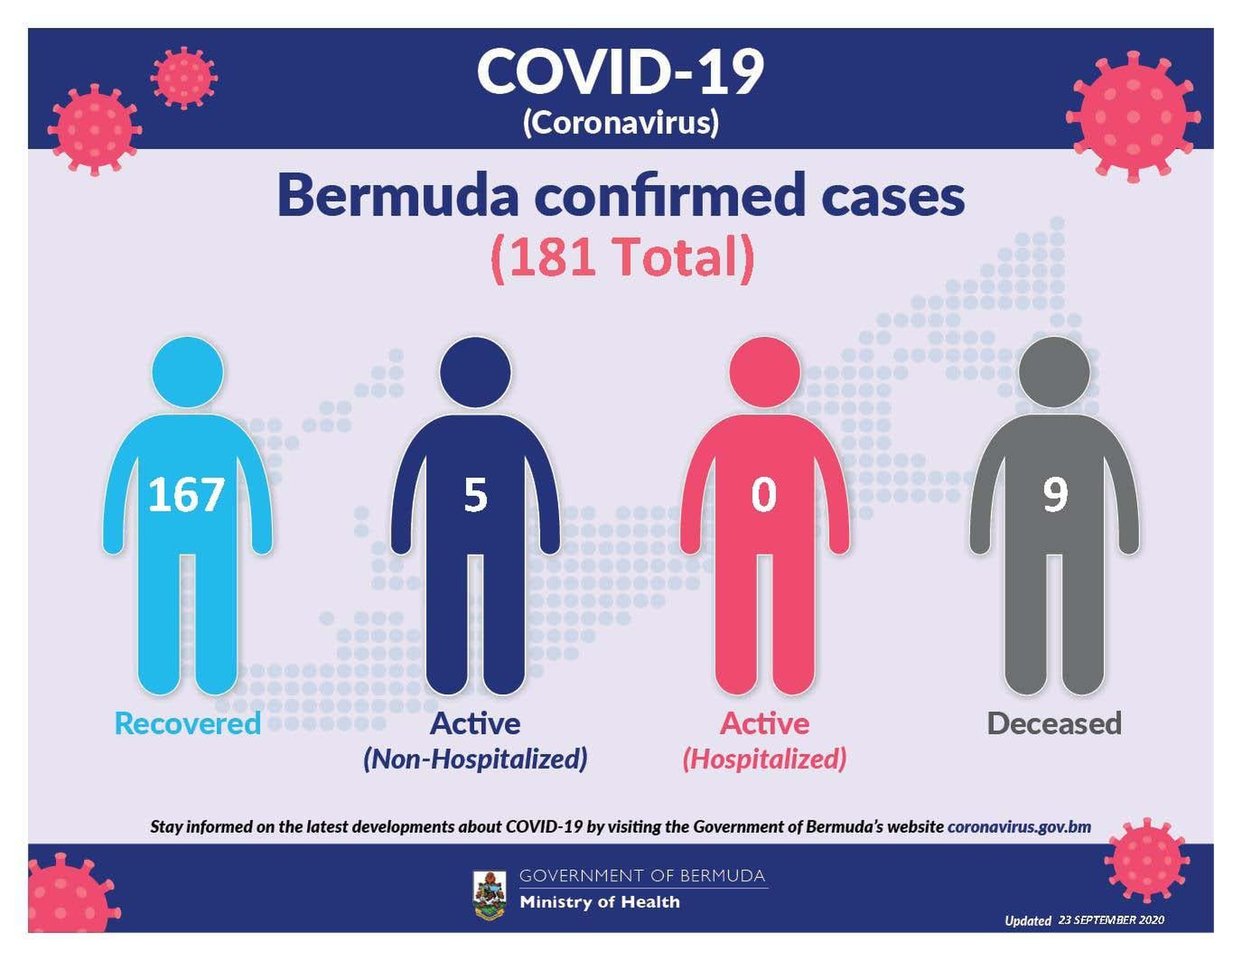 No new COVID-19 cases reported in Bermuda, 26 September